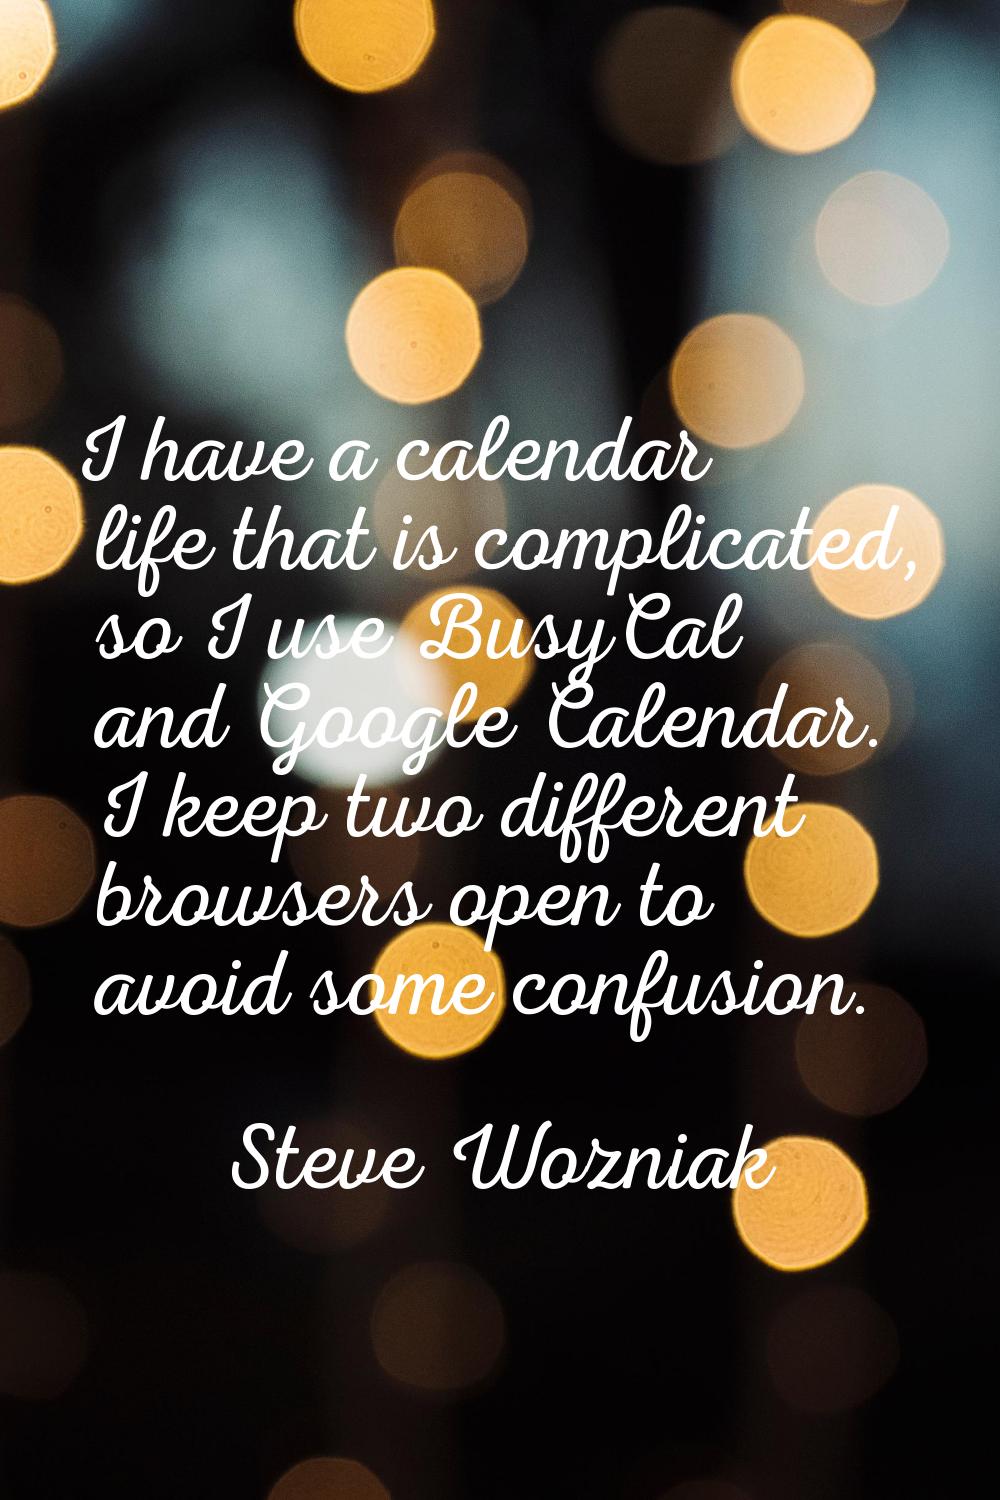 I have a calendar life that is complicated, so I use BusyCal and Google Calendar. I keep two differ